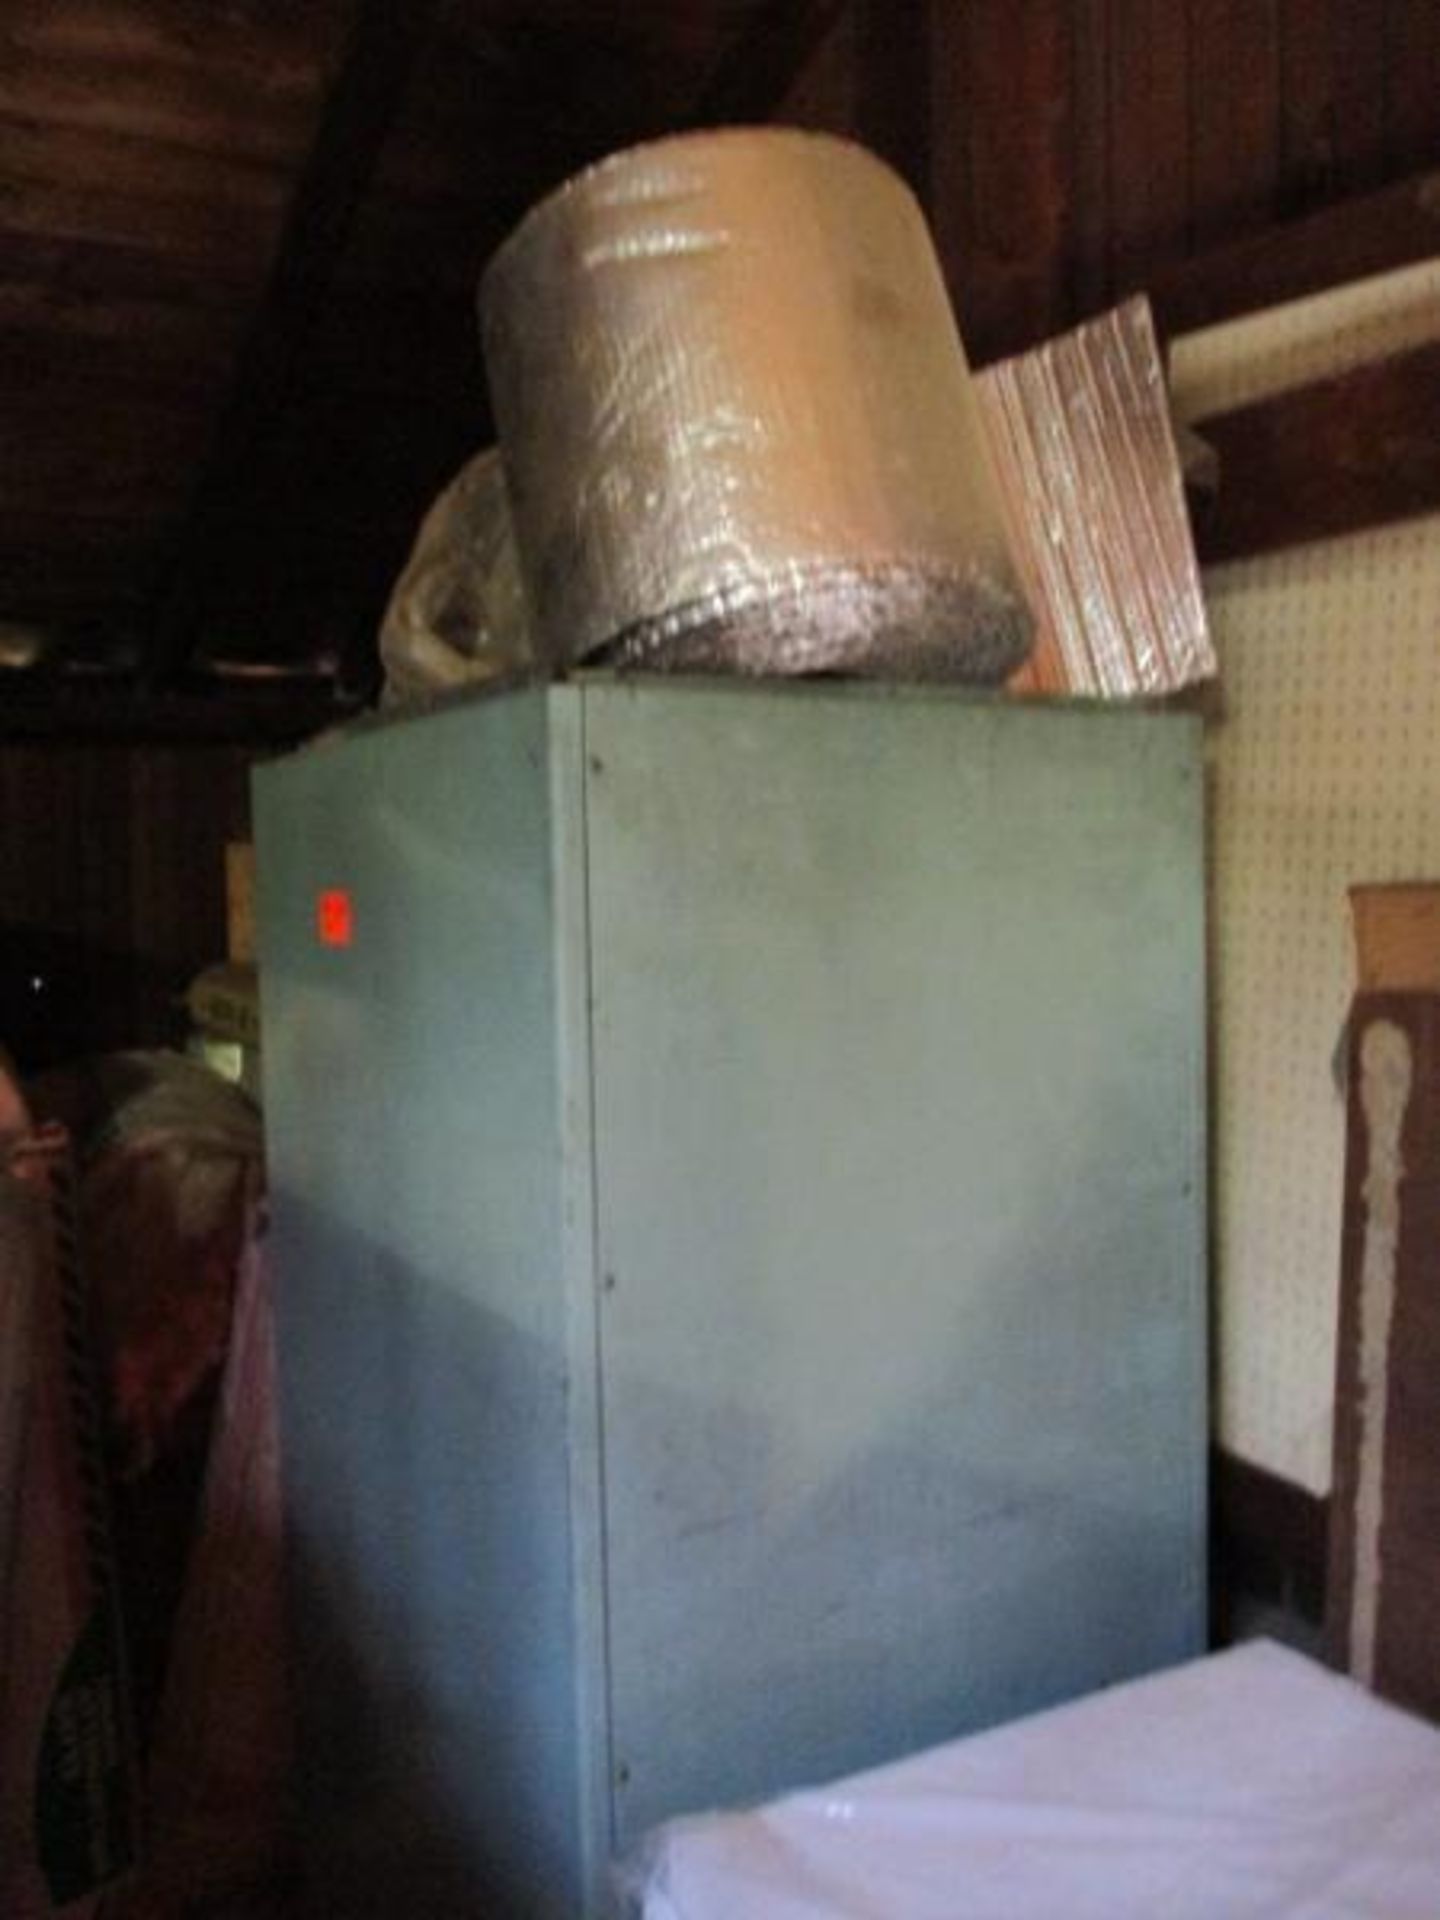 Williamson Temp-O-Matic Hot Air Furnace, Oil Fired w/ Contents on Top - Image 2 of 2